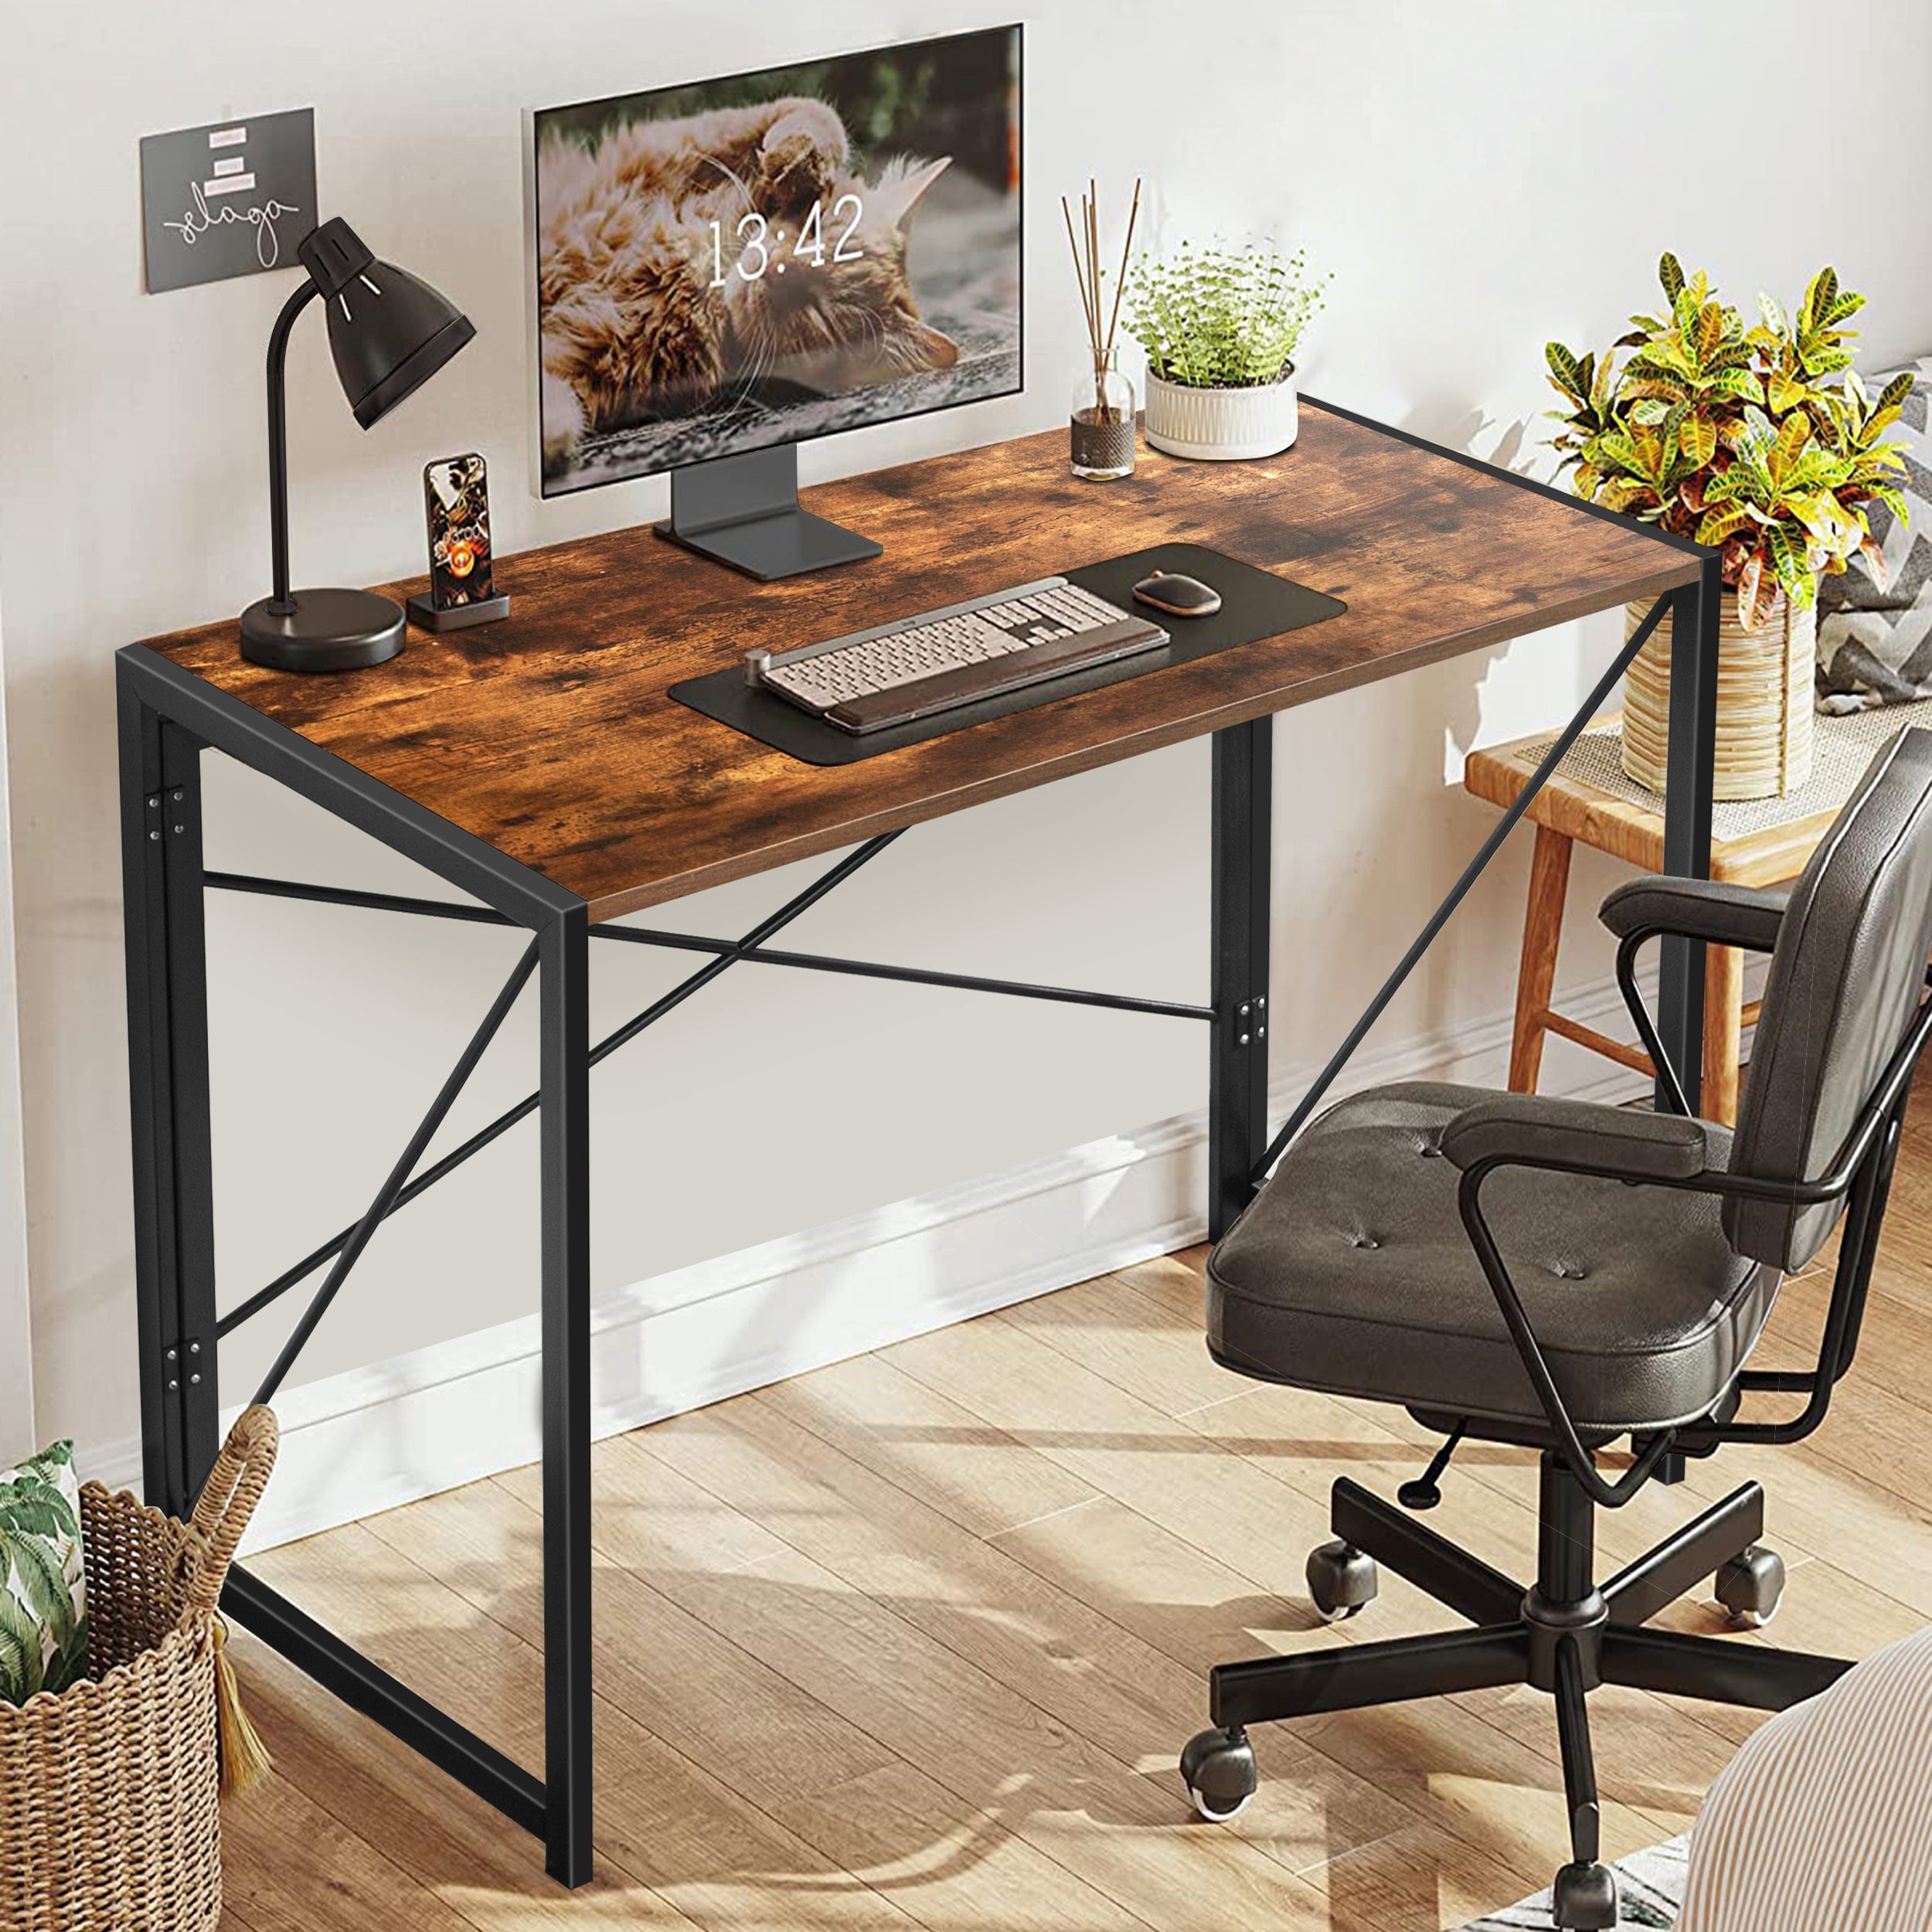 Easyfashion Industrial Computer Desk with Monitor Stand, Rustic Brown/Black